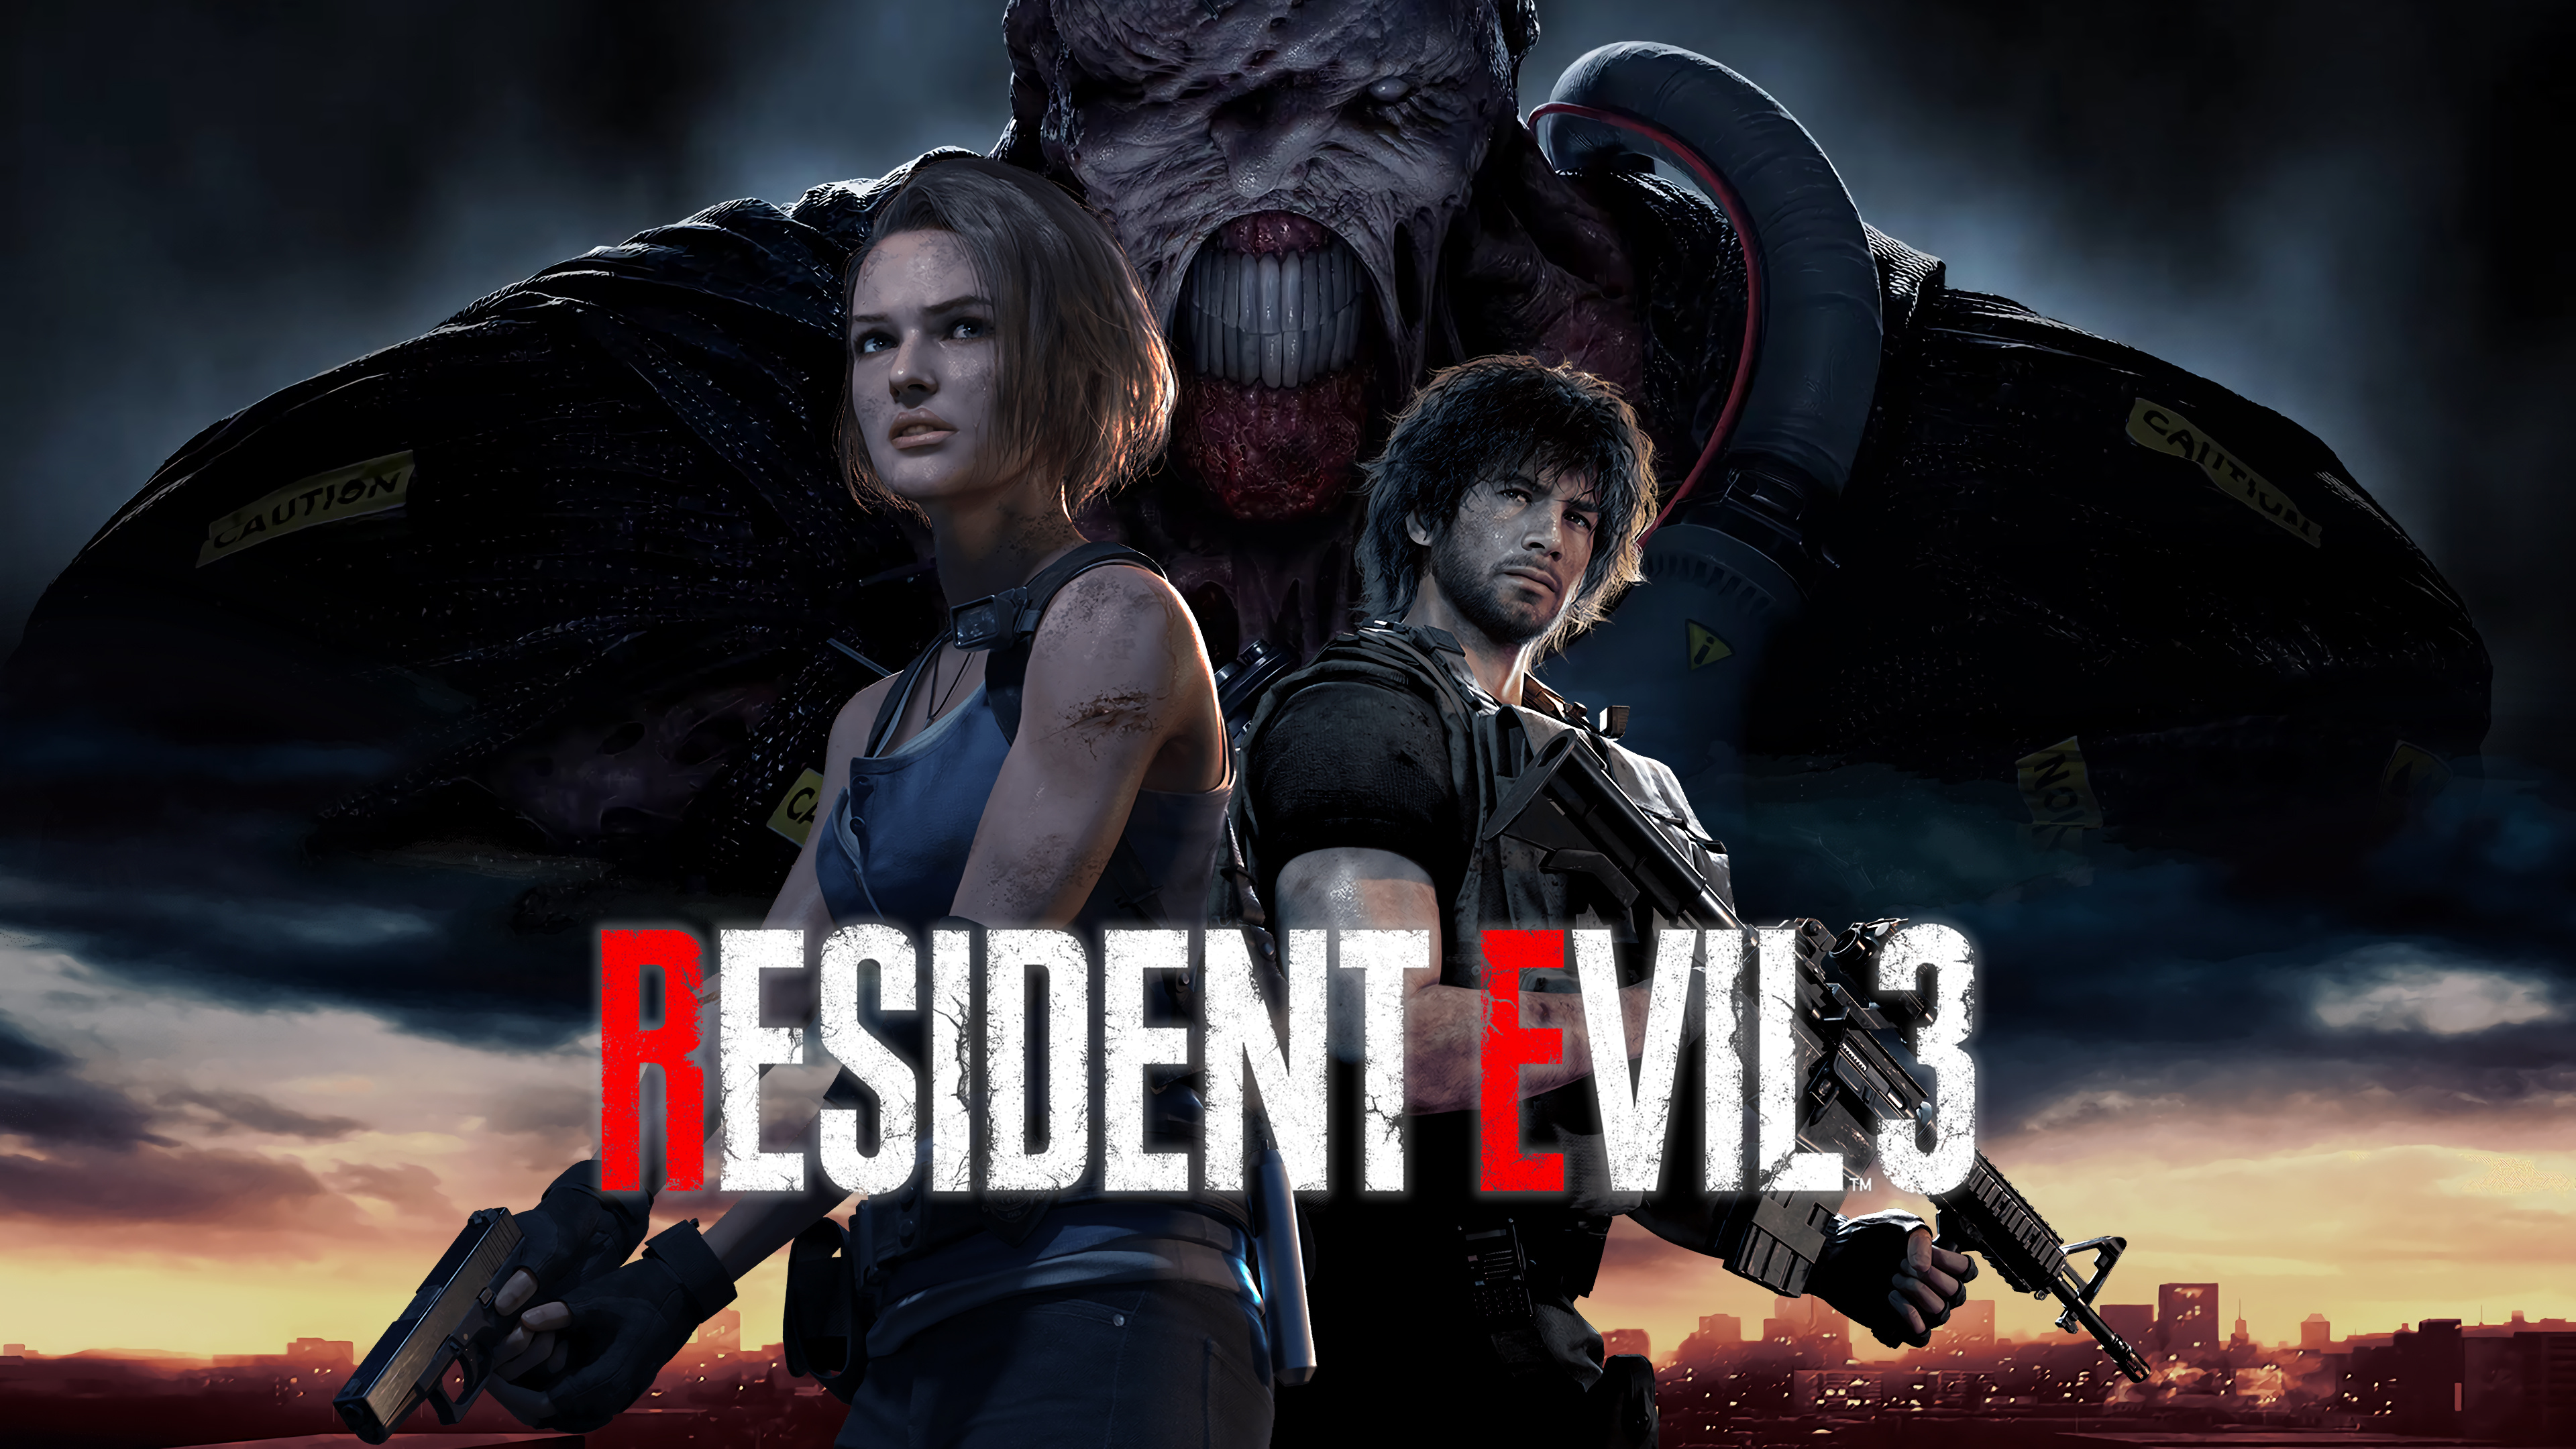 Playable Demo For Resident Evil 3: Raccoon City Out This Week - LRM